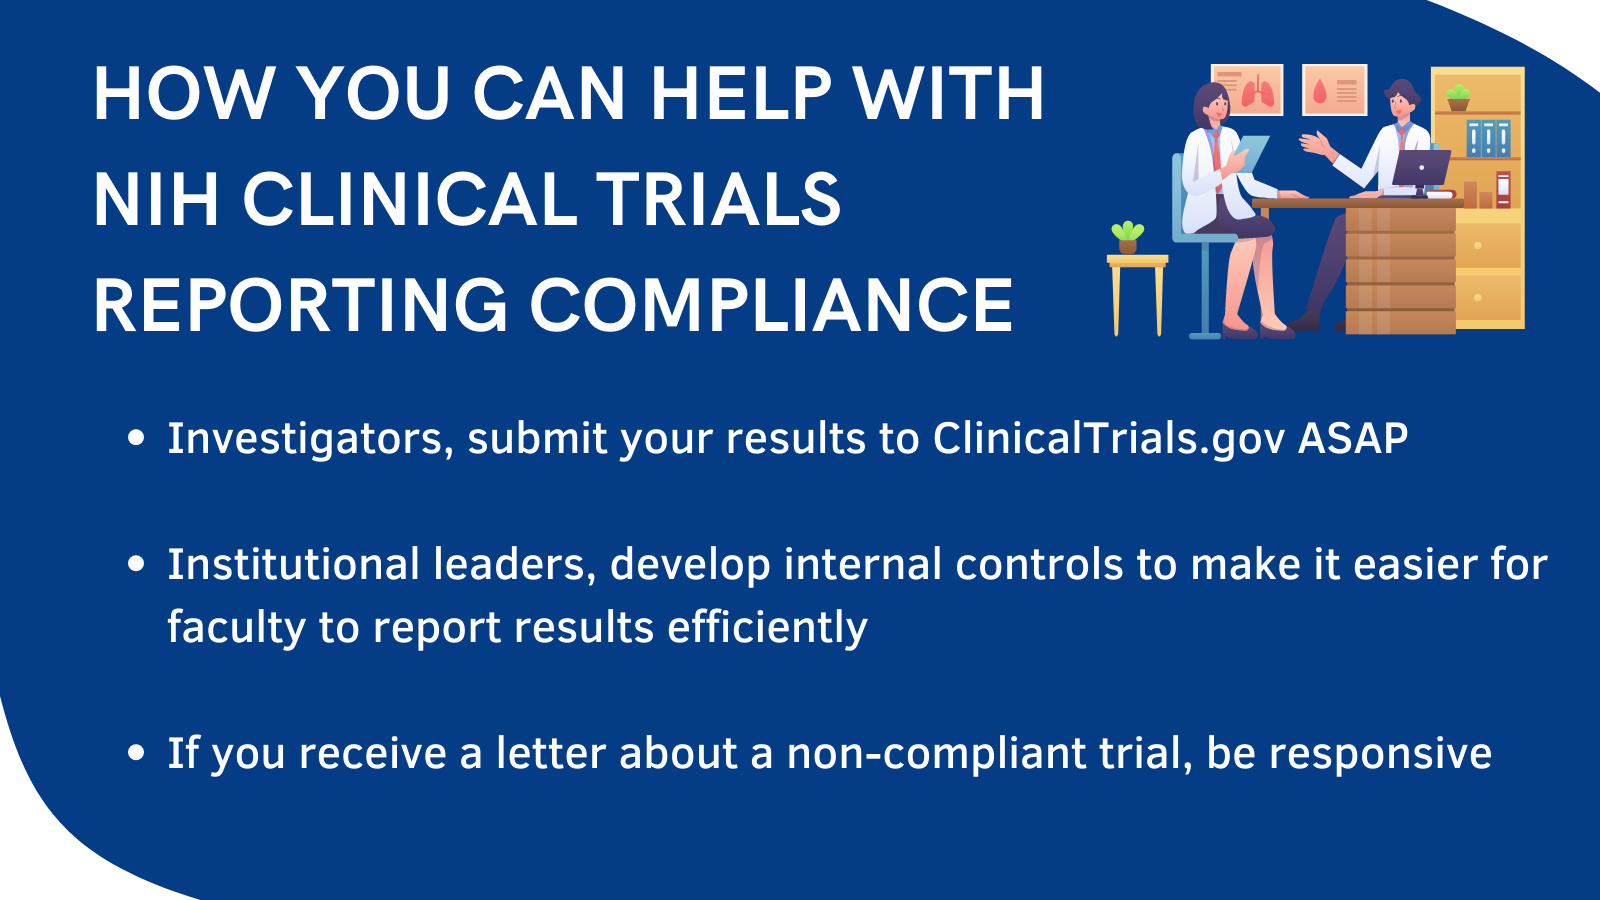 How you can help with NIH clinical trials reporting compliance • Investigators, submit your results to ClinicalTrials.gov ASAP • Institutional leaders, develop internal controls to make it easier for faculty to report results efficiently • If you receive a letter about a non-compliant trial, be responsive